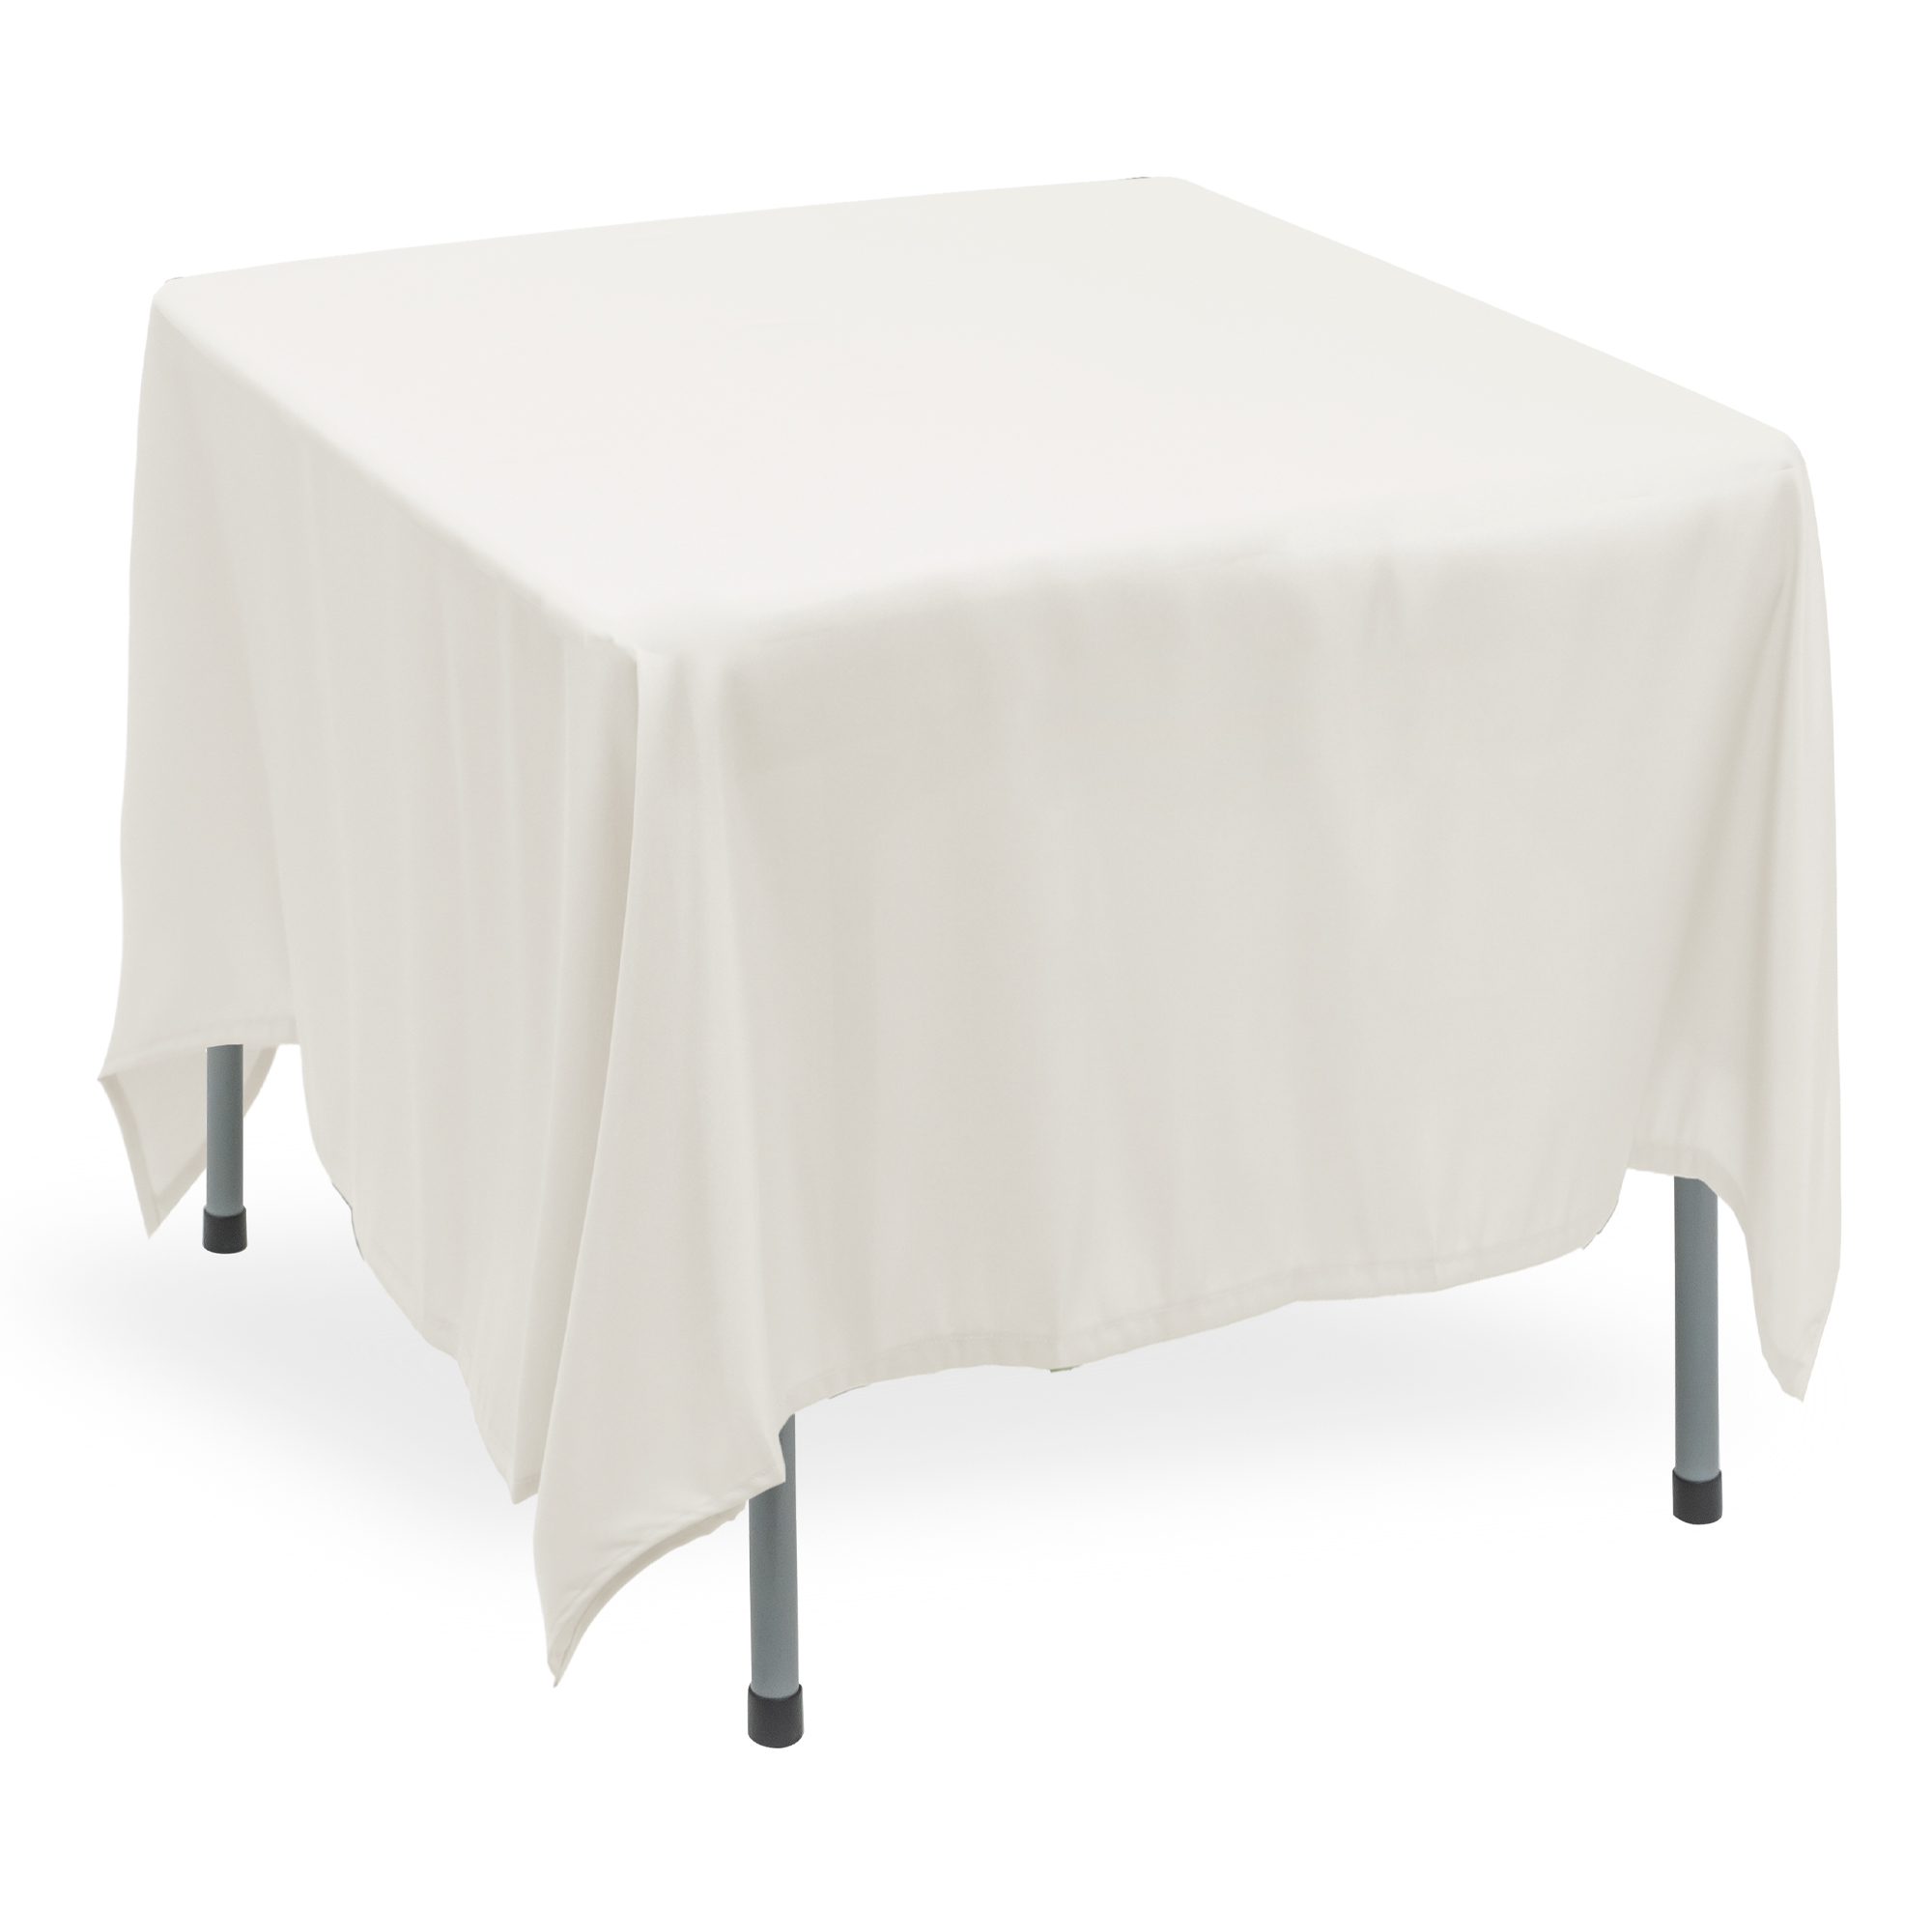 Polyester Square Table Cover 90" - White